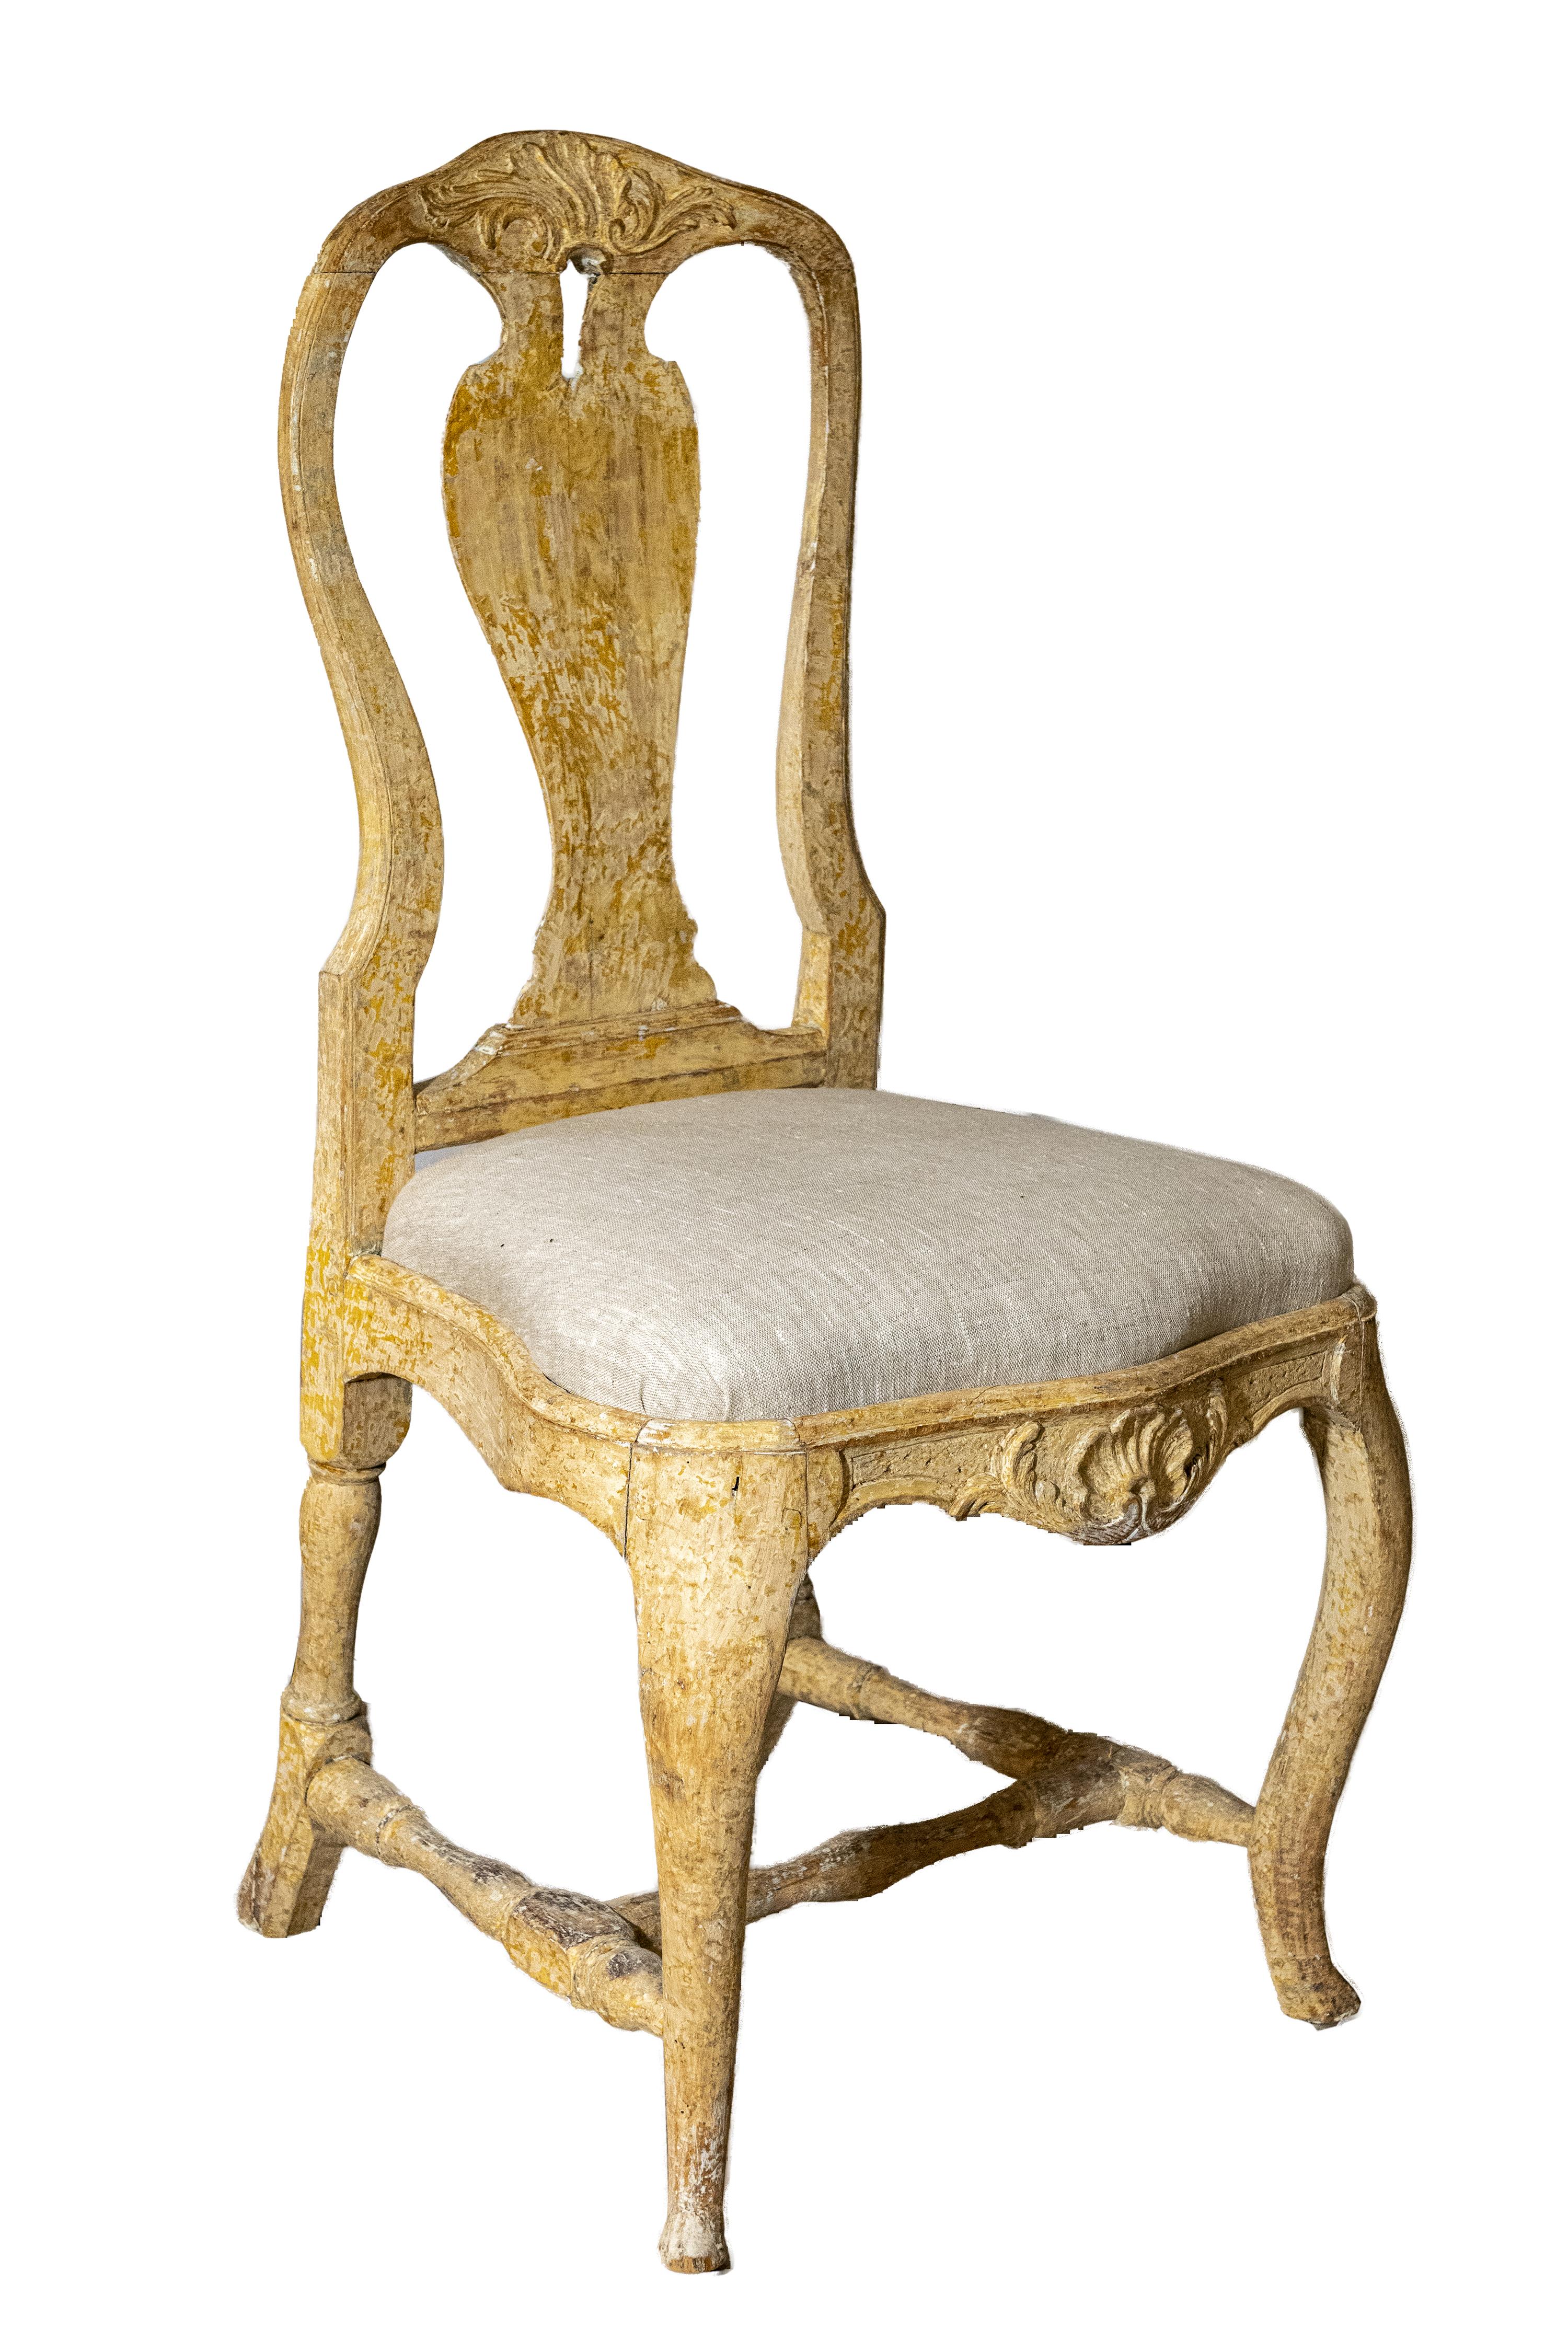 A pair of Stockholm made Rococo chairs scraped to original paint, with carved splats, cabriole legs, H-Form cross stretchers, and new linen upholstery. Created in the 18th century, each of this pair of Rococo period side chairs features a tall